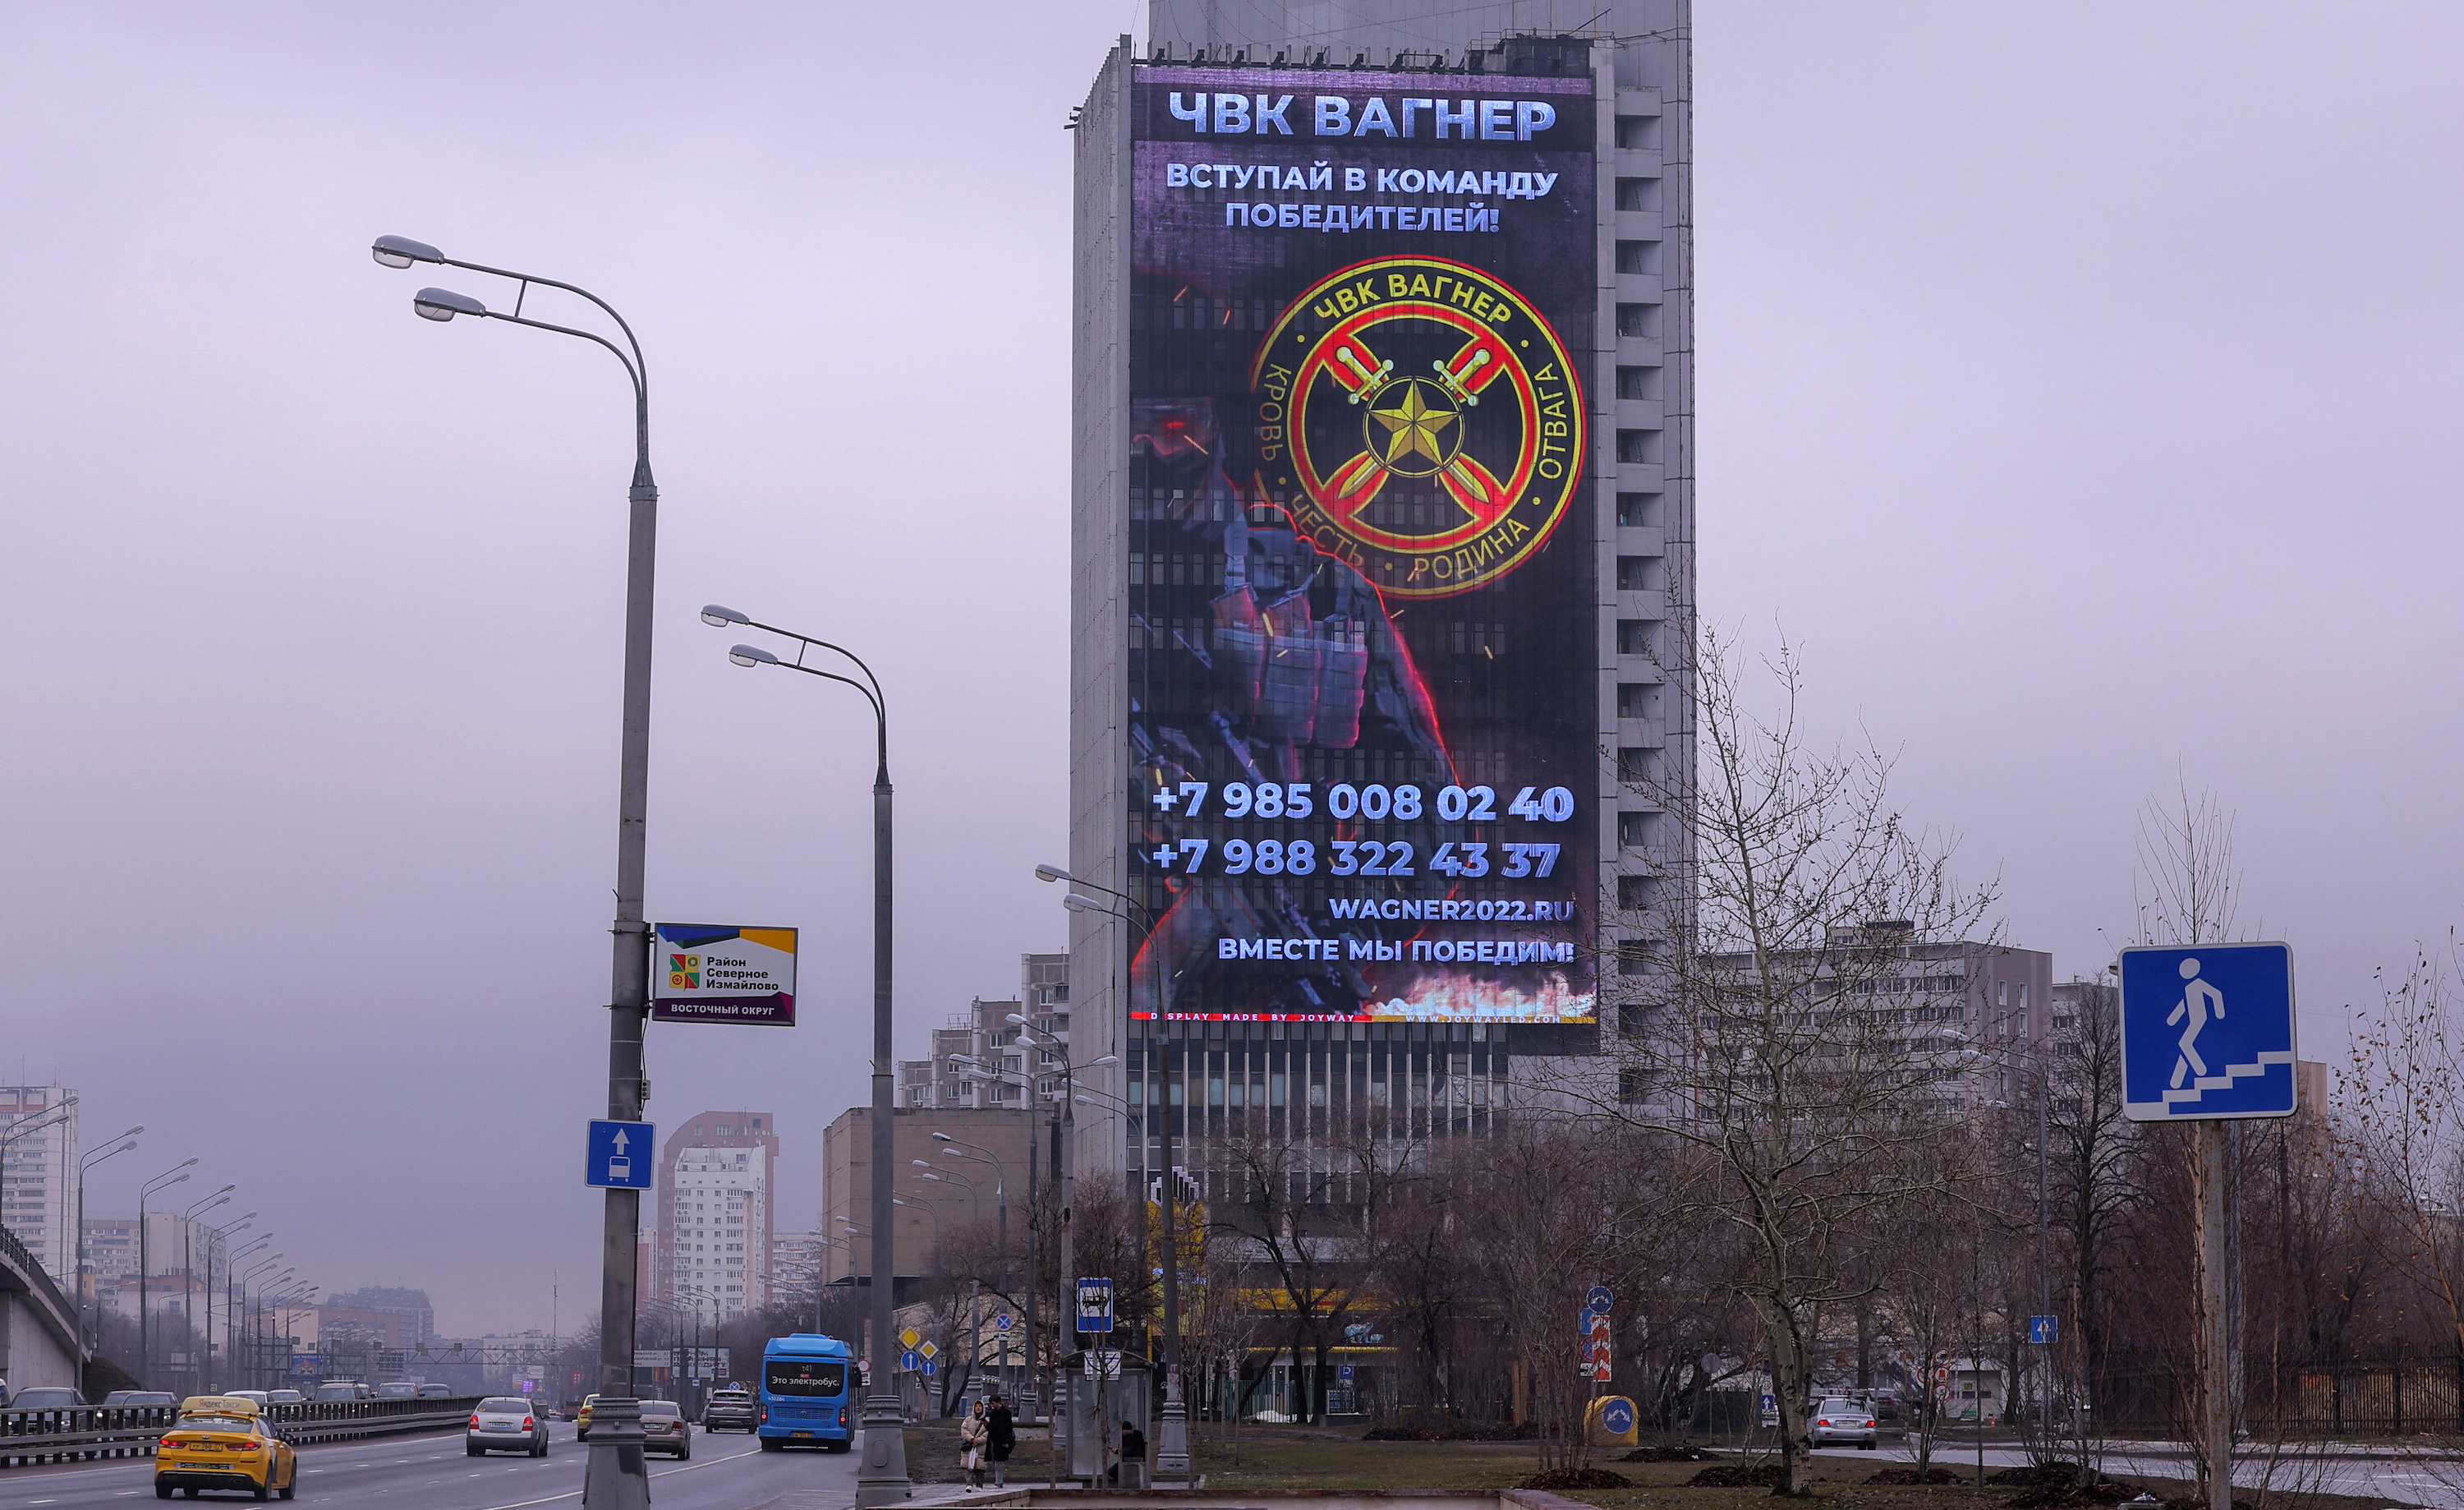 An advertising screen, promoting Wagner private mercenary group, is on display on the facade of a building in Moscow, Russia, on March 27, 2023. A slogan on the screen reads: "Join the team of victors!"